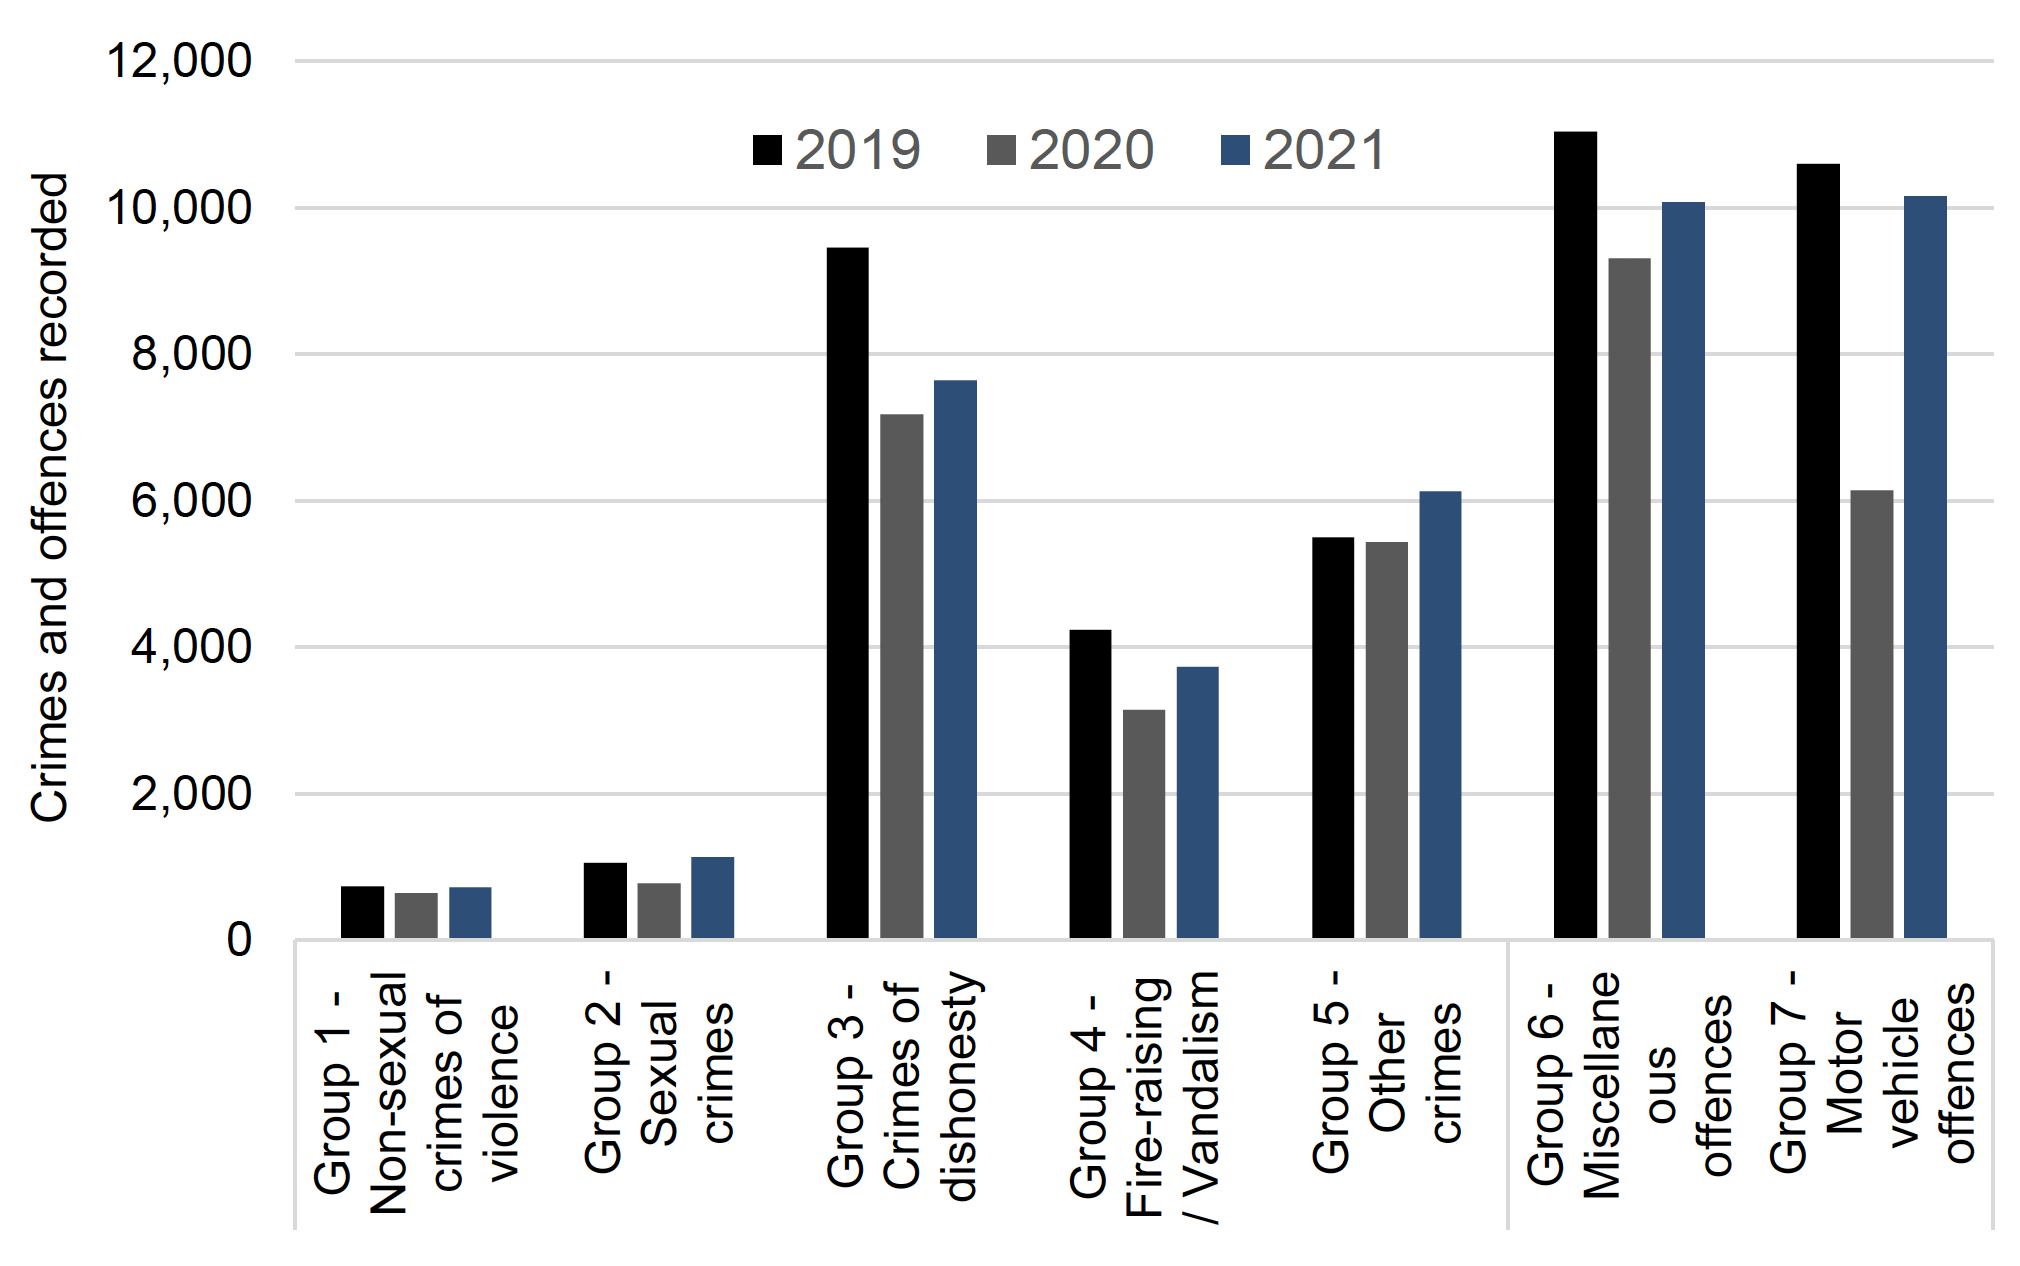 Bar chart showing crimes and offences by crime group, comparing April 2019, 2020 and 2021.